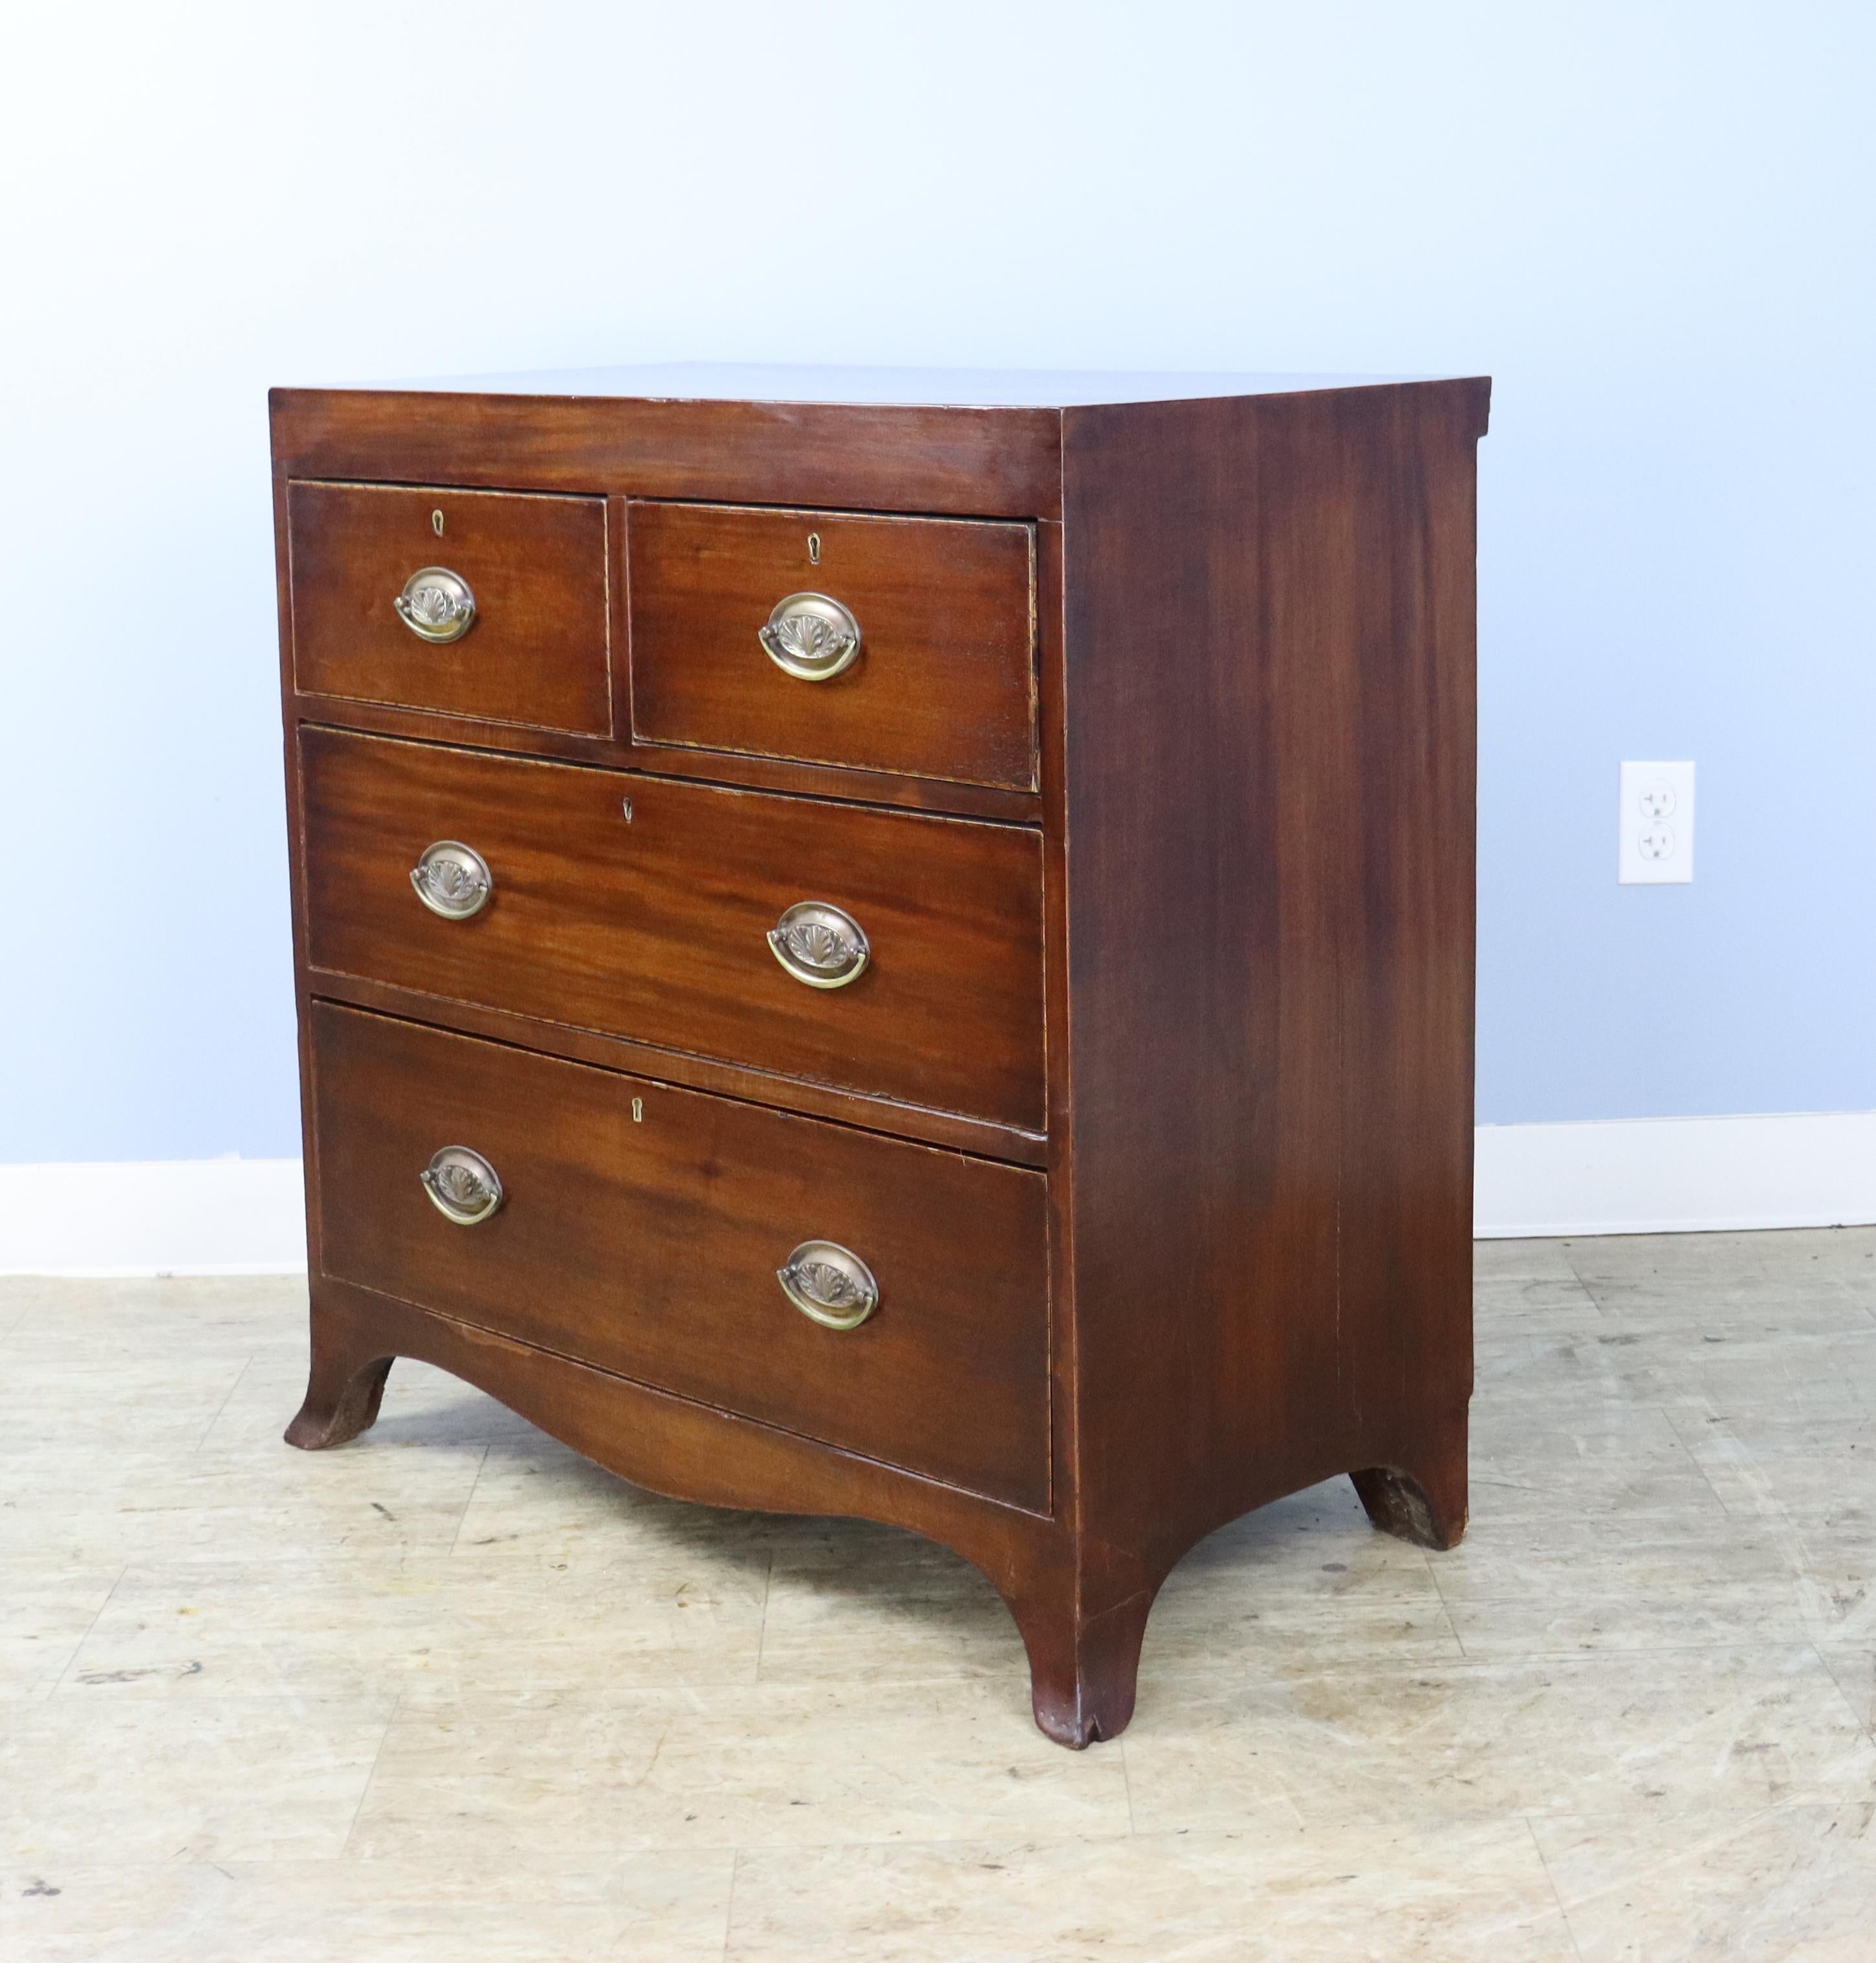 Regency Mahogany Chest of Drawers with Intricate Stringing In Good Condition For Sale In Port Chester, NY